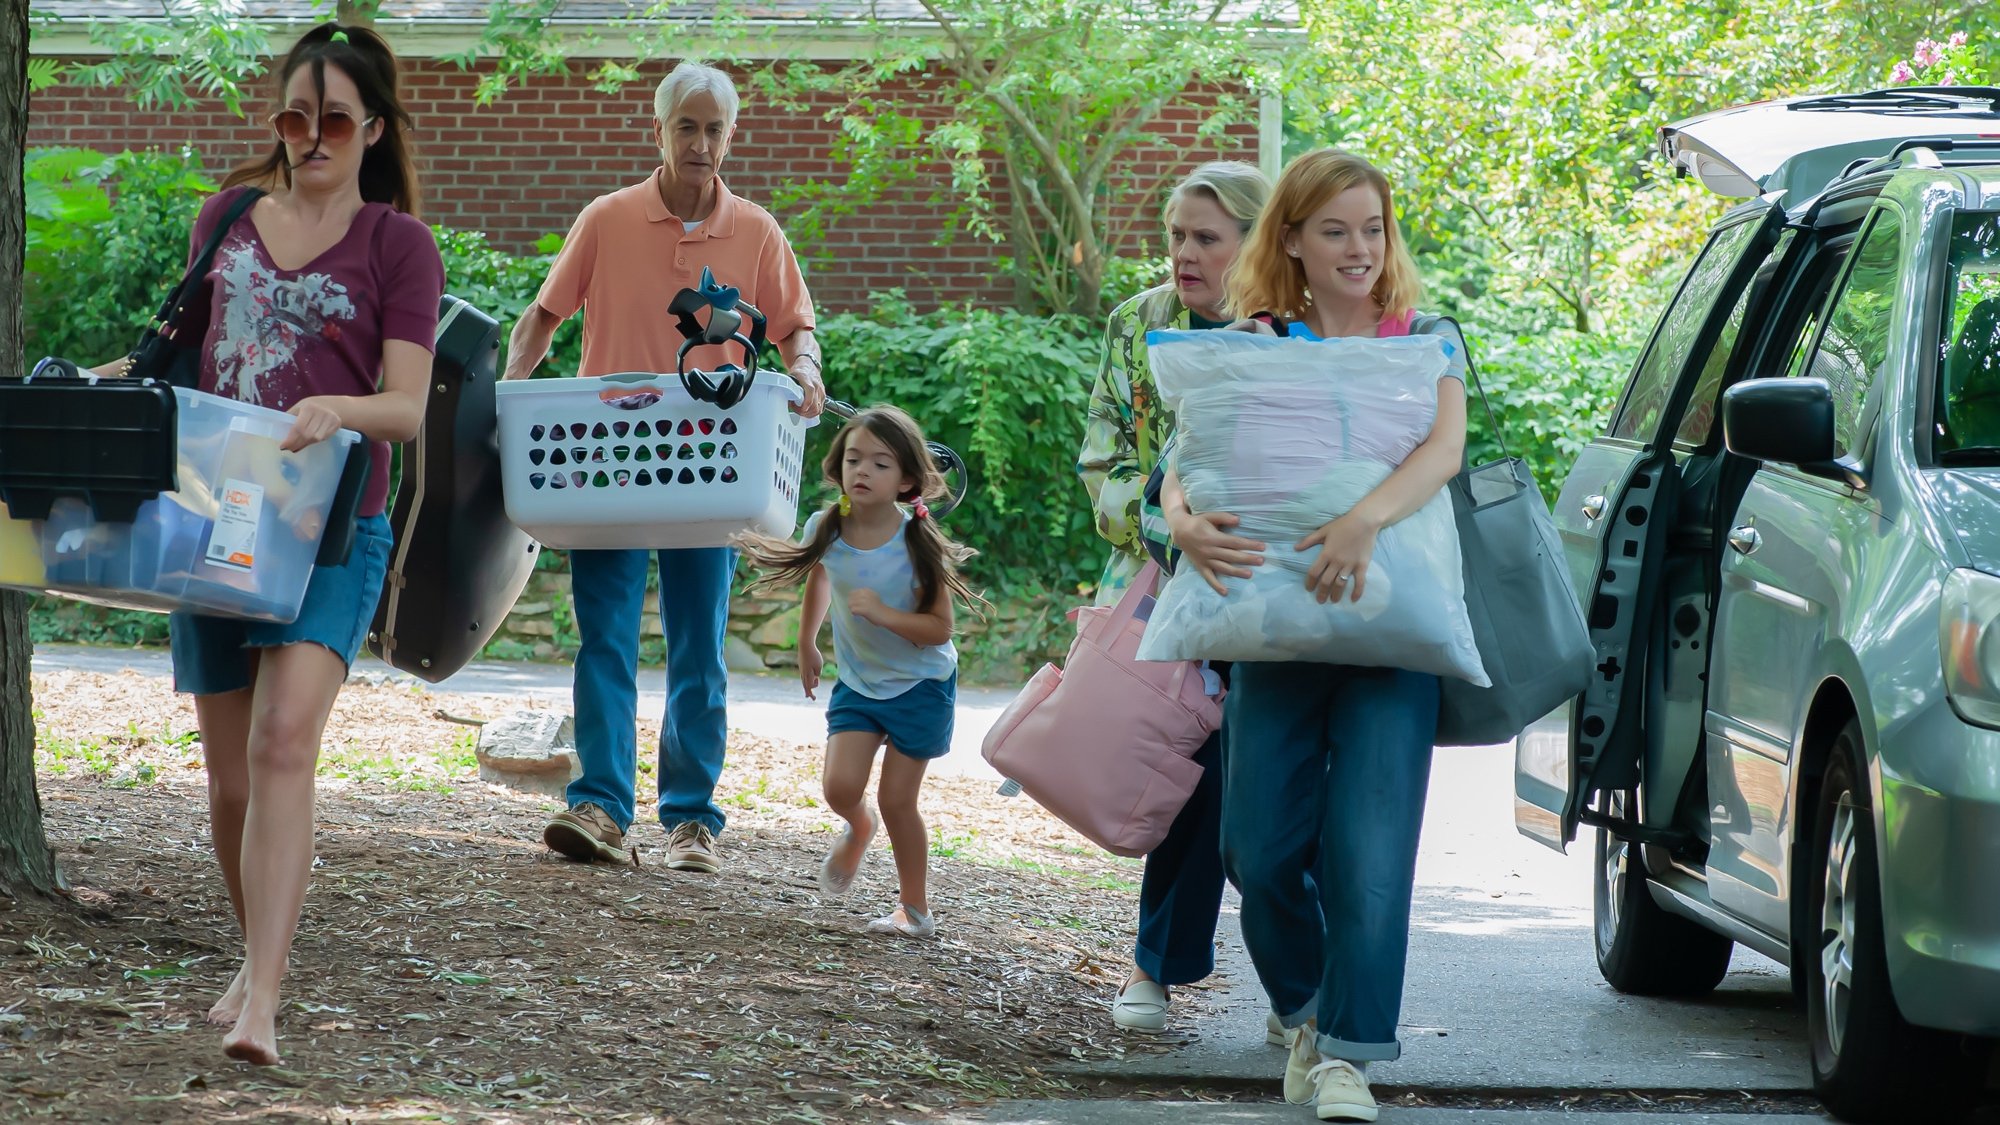 'A Little Prayer' Anna Camp as Patti, David Strathairn as Bill, Billie Roy as Hadley, Celia Weston as Venida, and Jane Levy as Tammy holding boxes, baskets, and pillows from a car and walking on the dirt path